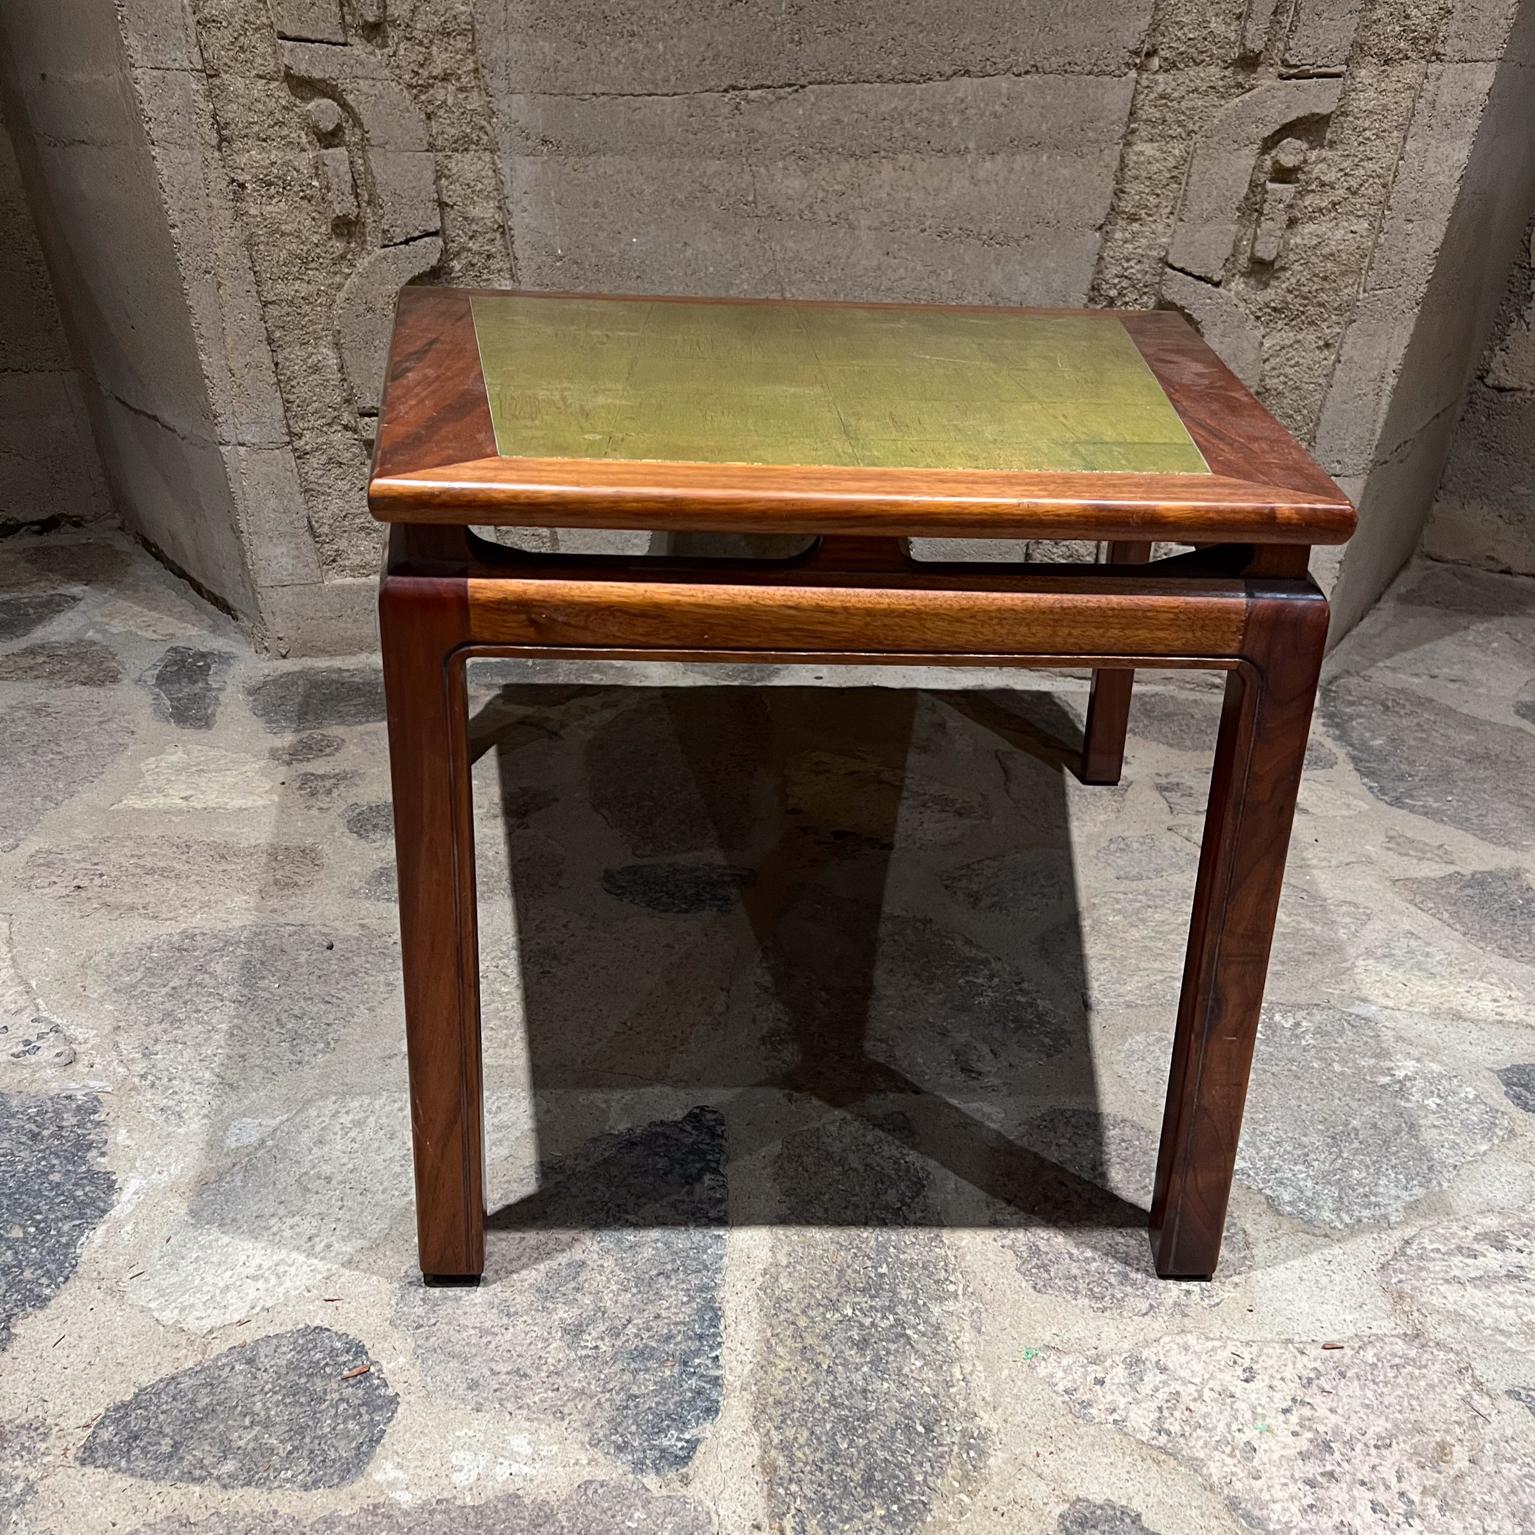 MCM Side Wedge Table walnut wood with patinated gold leaf top.
18.63 h x widest 28 w front 18.25 w x 30.38 d.
Attributed to Edward Wormley for Dunbar Furniture High Point, NC.
No label
Preowned original vintage condition with restoration
Refer to